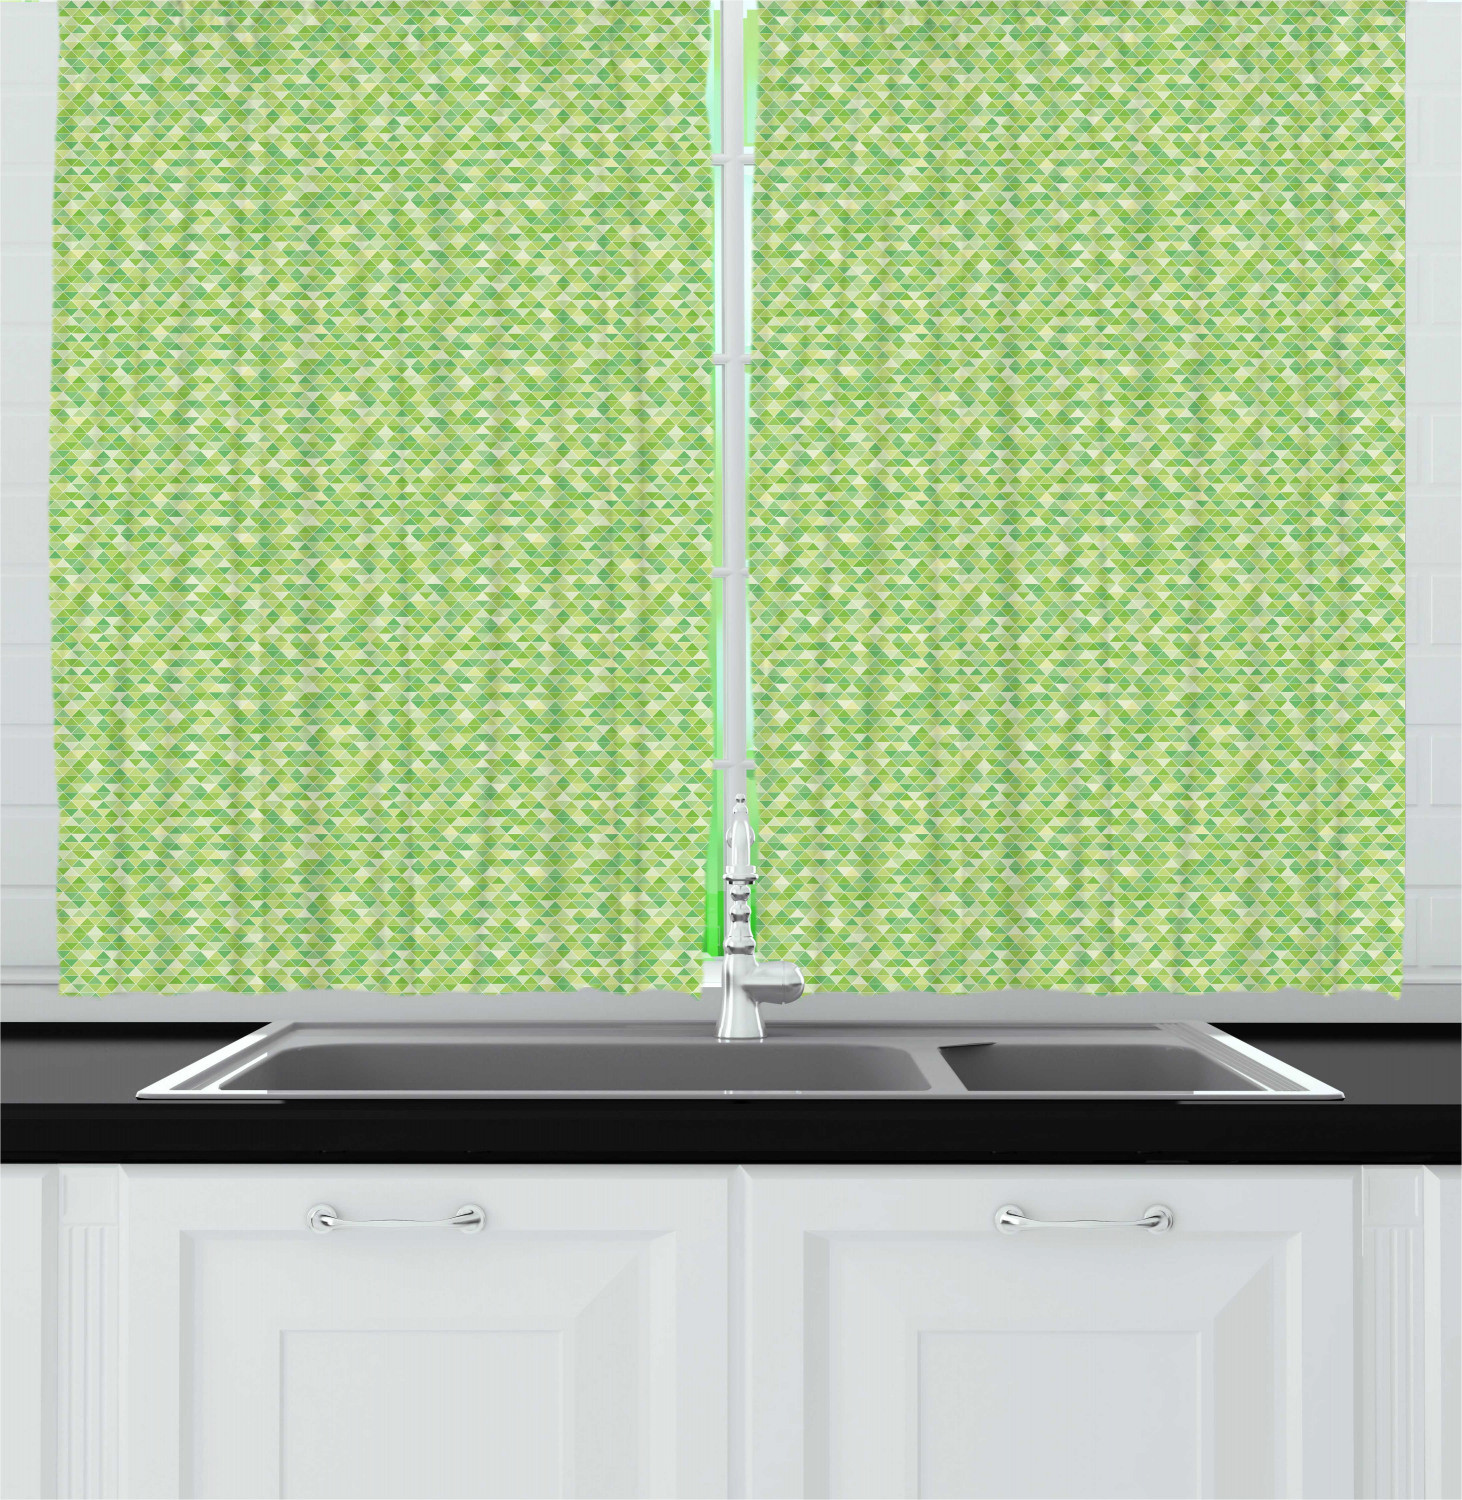 Lime Green Kitchen Curtains
 Lime Green Kitchen Curtains 2 Panel Set Window Drapes 55